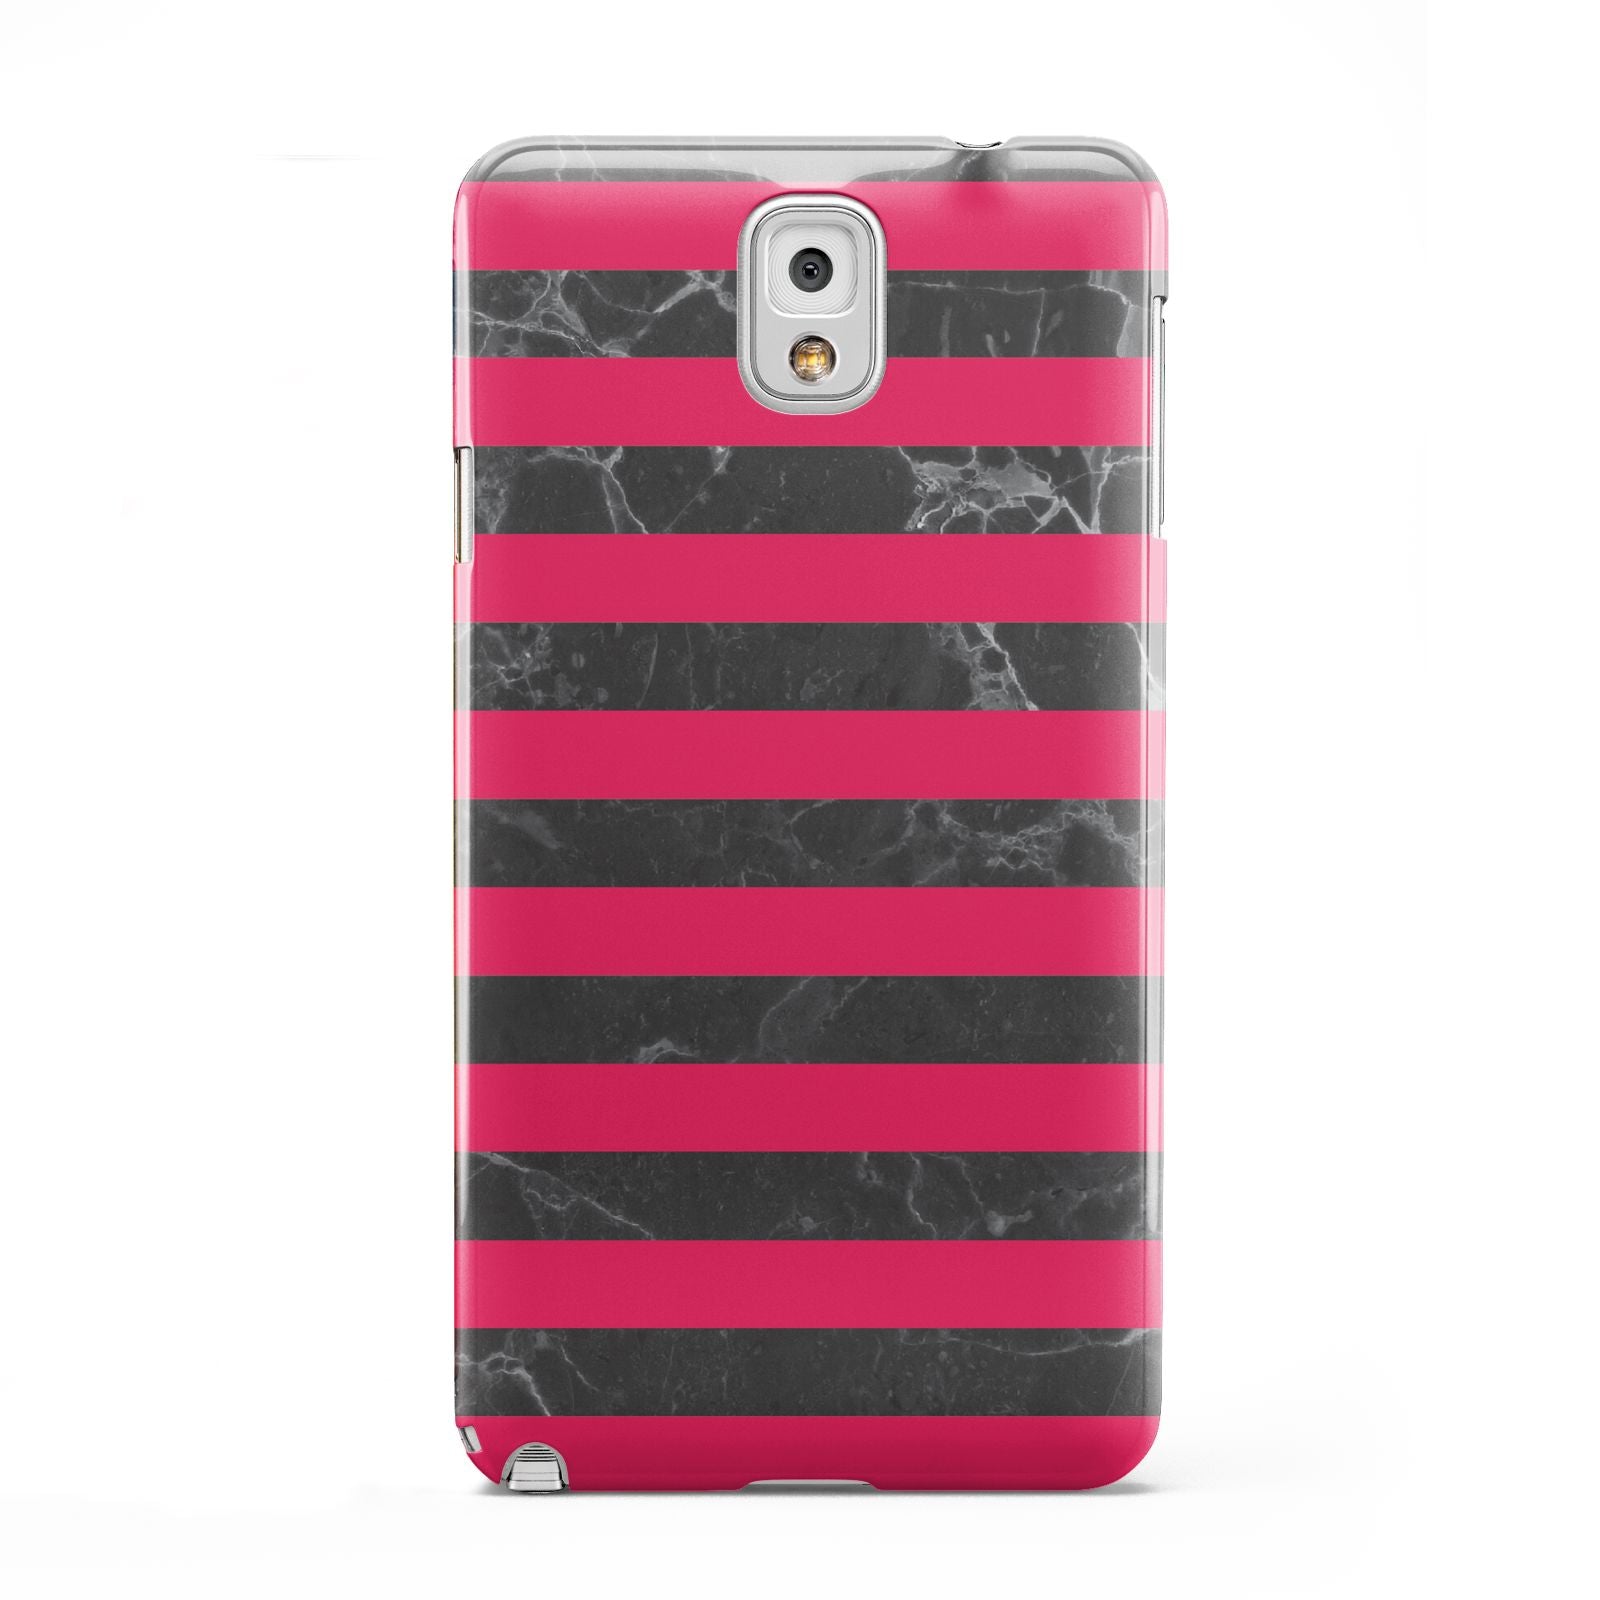 Marble Black Hot Pink Samsung Galaxy Note 3 Case